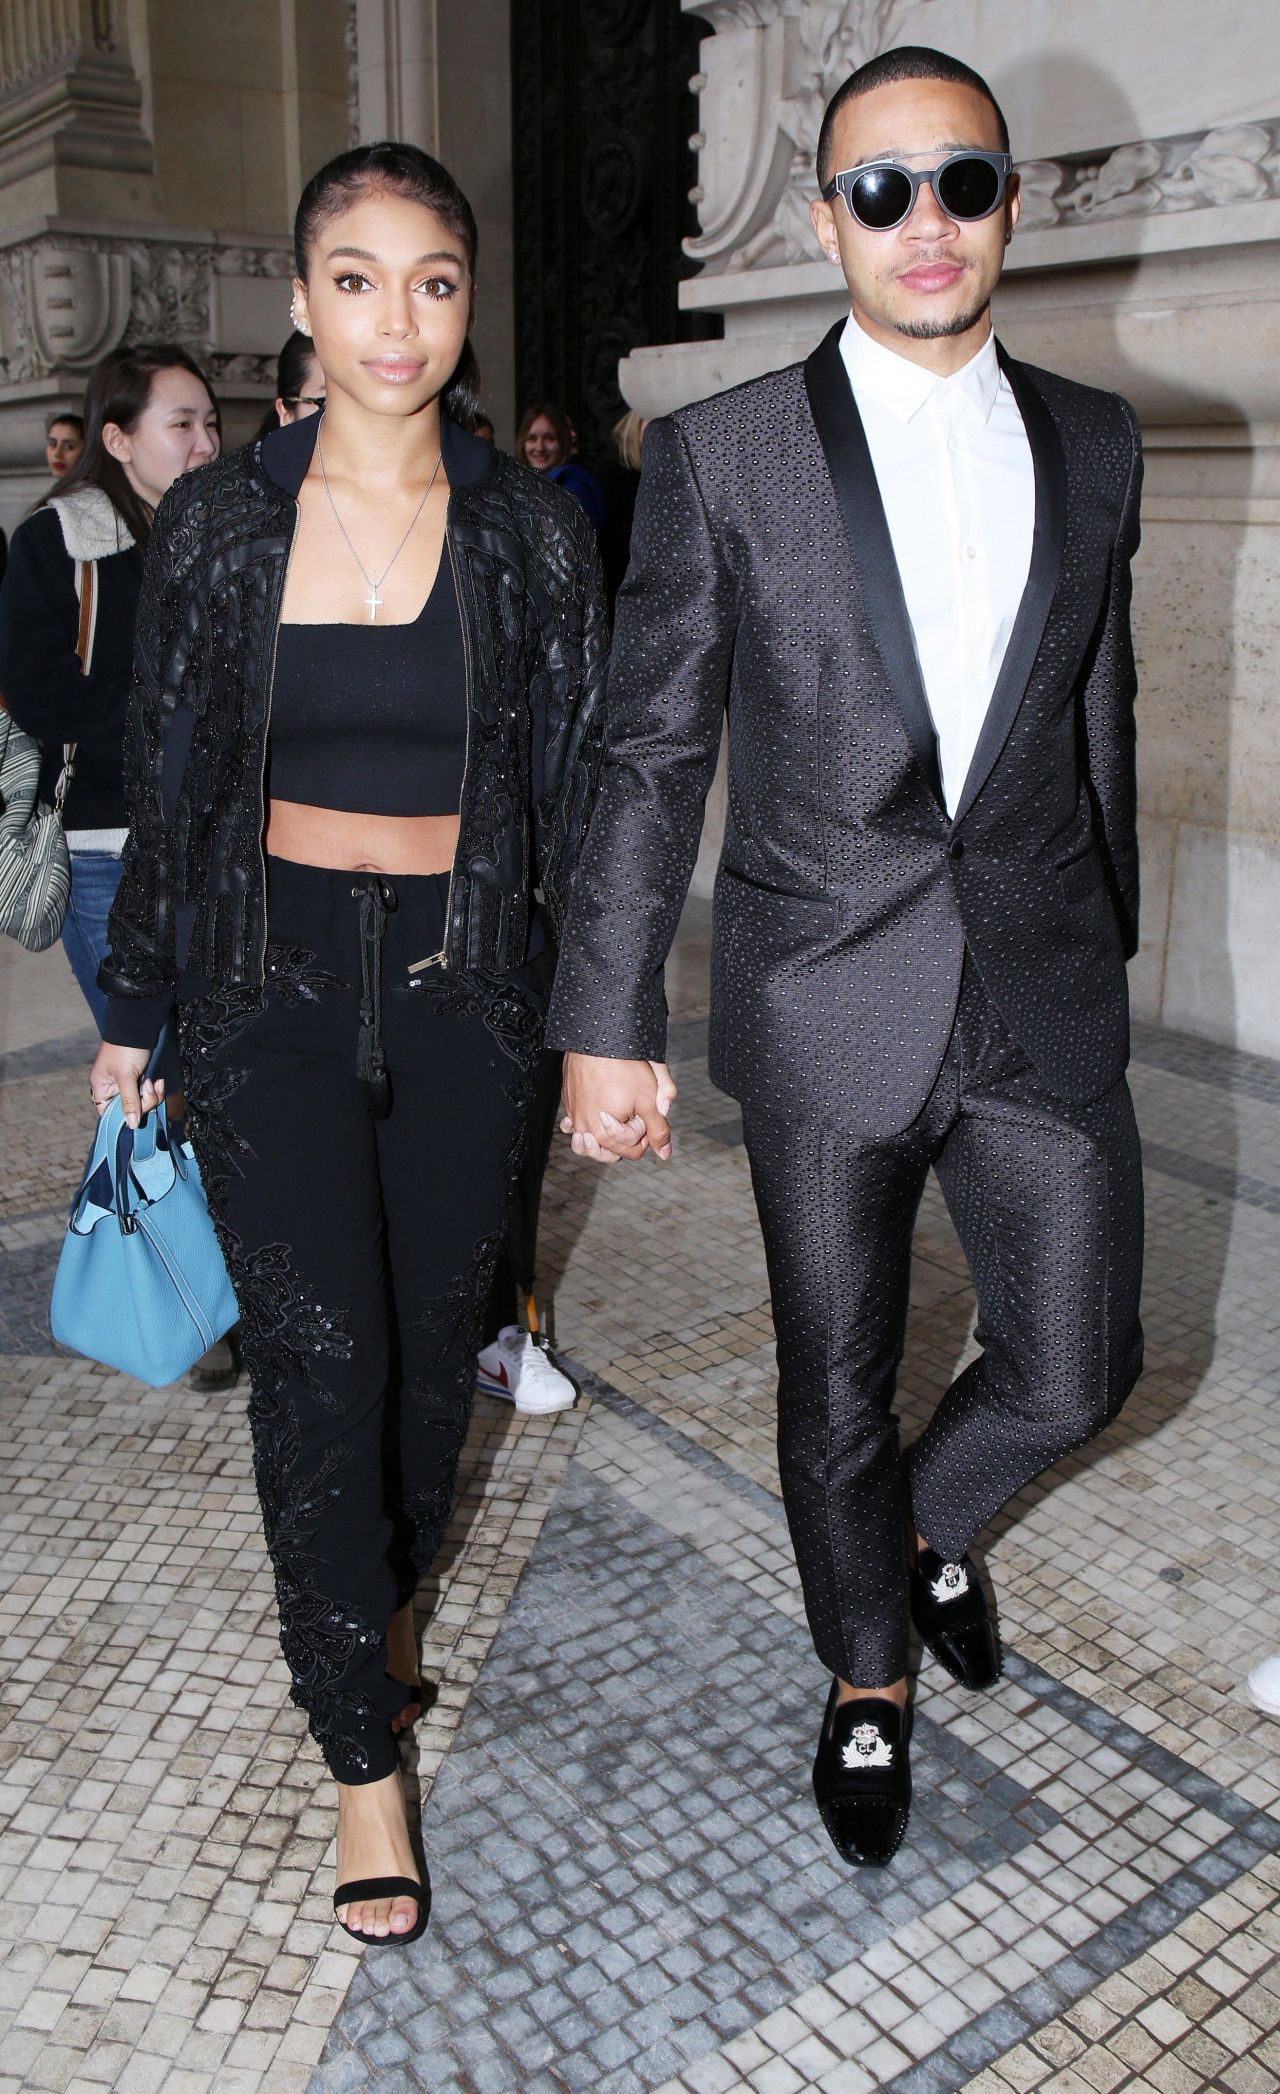 Lori Harvey & Memphis Depay leaving the Elie Saab show during Paris Fashion  Week Ready to wear Fall/Winter 2017-2018 on March 4, 2017 in Paris, France.  (Photo by Lyvans Boolaky/imageSPACE) *** Please